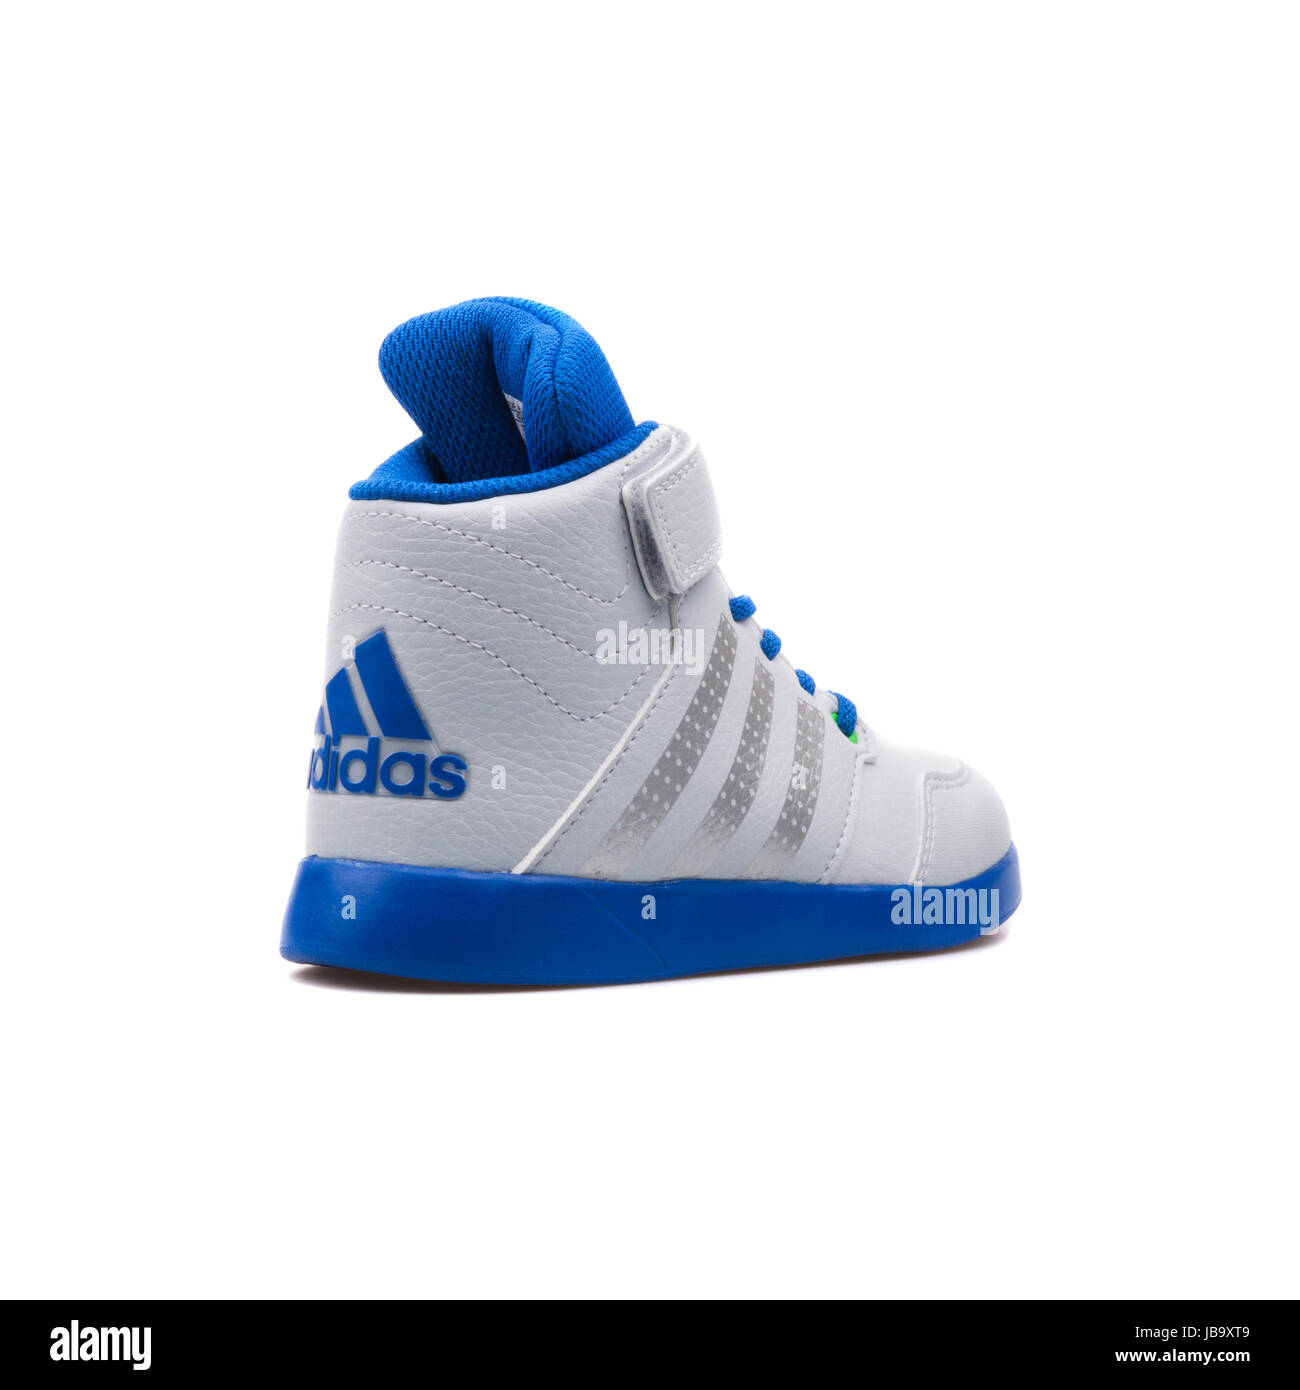 Adidas Jan BS 2 mid 1 Silver and Blue Kids Running Shoes - B23909 Stock  Photo - Alamy